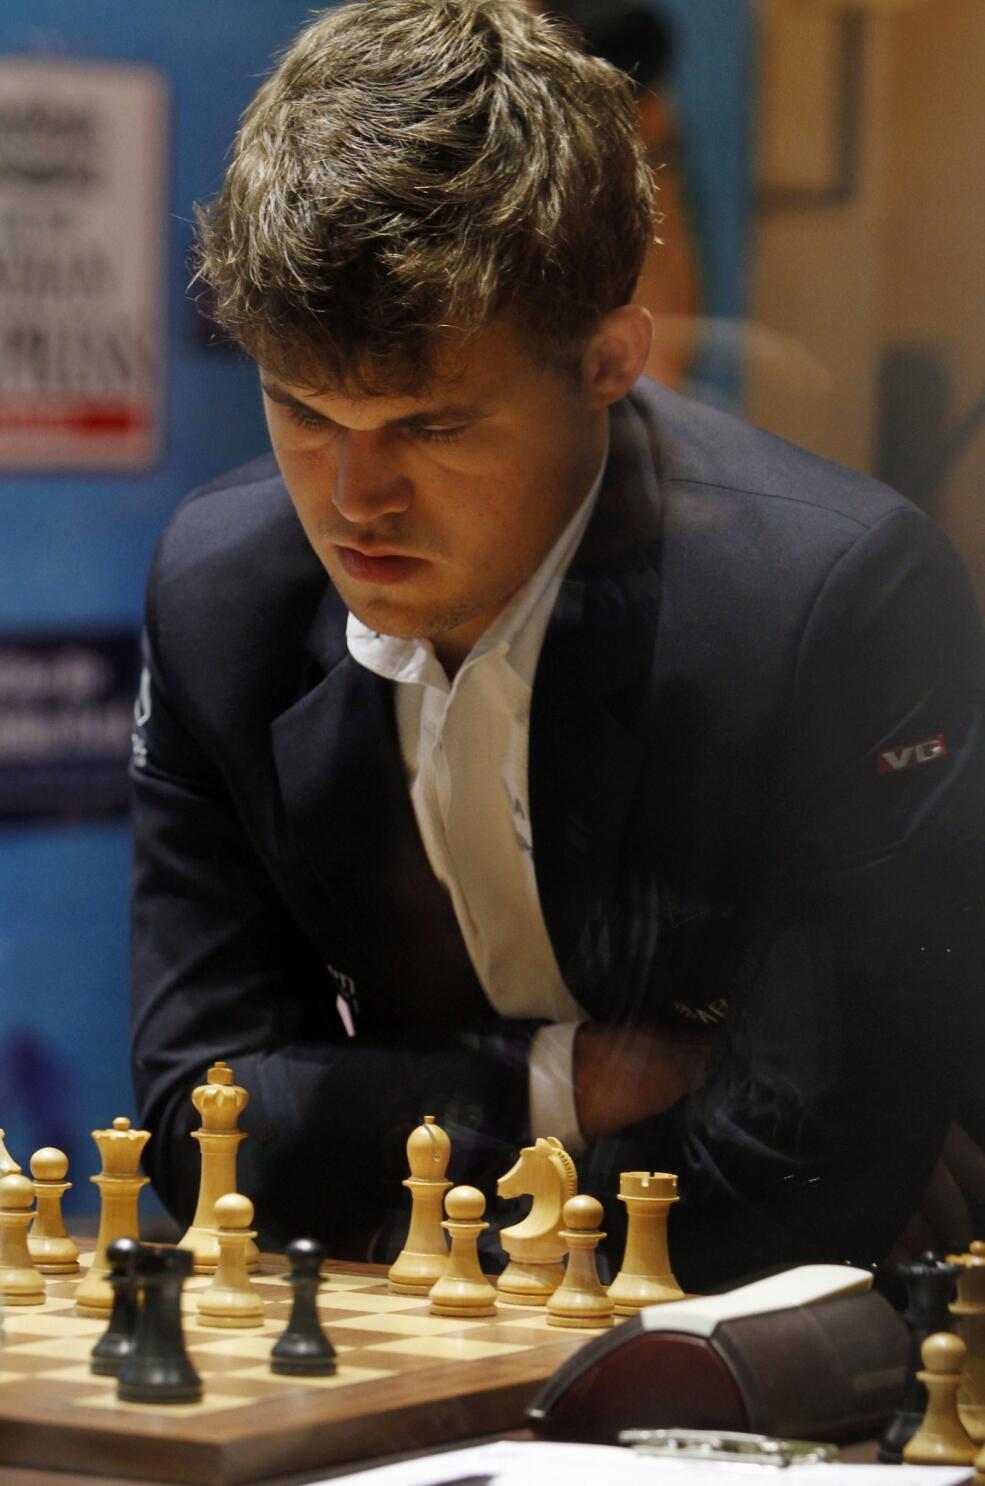 Anand vs Carlsen: the age effect in the World Chess Championship